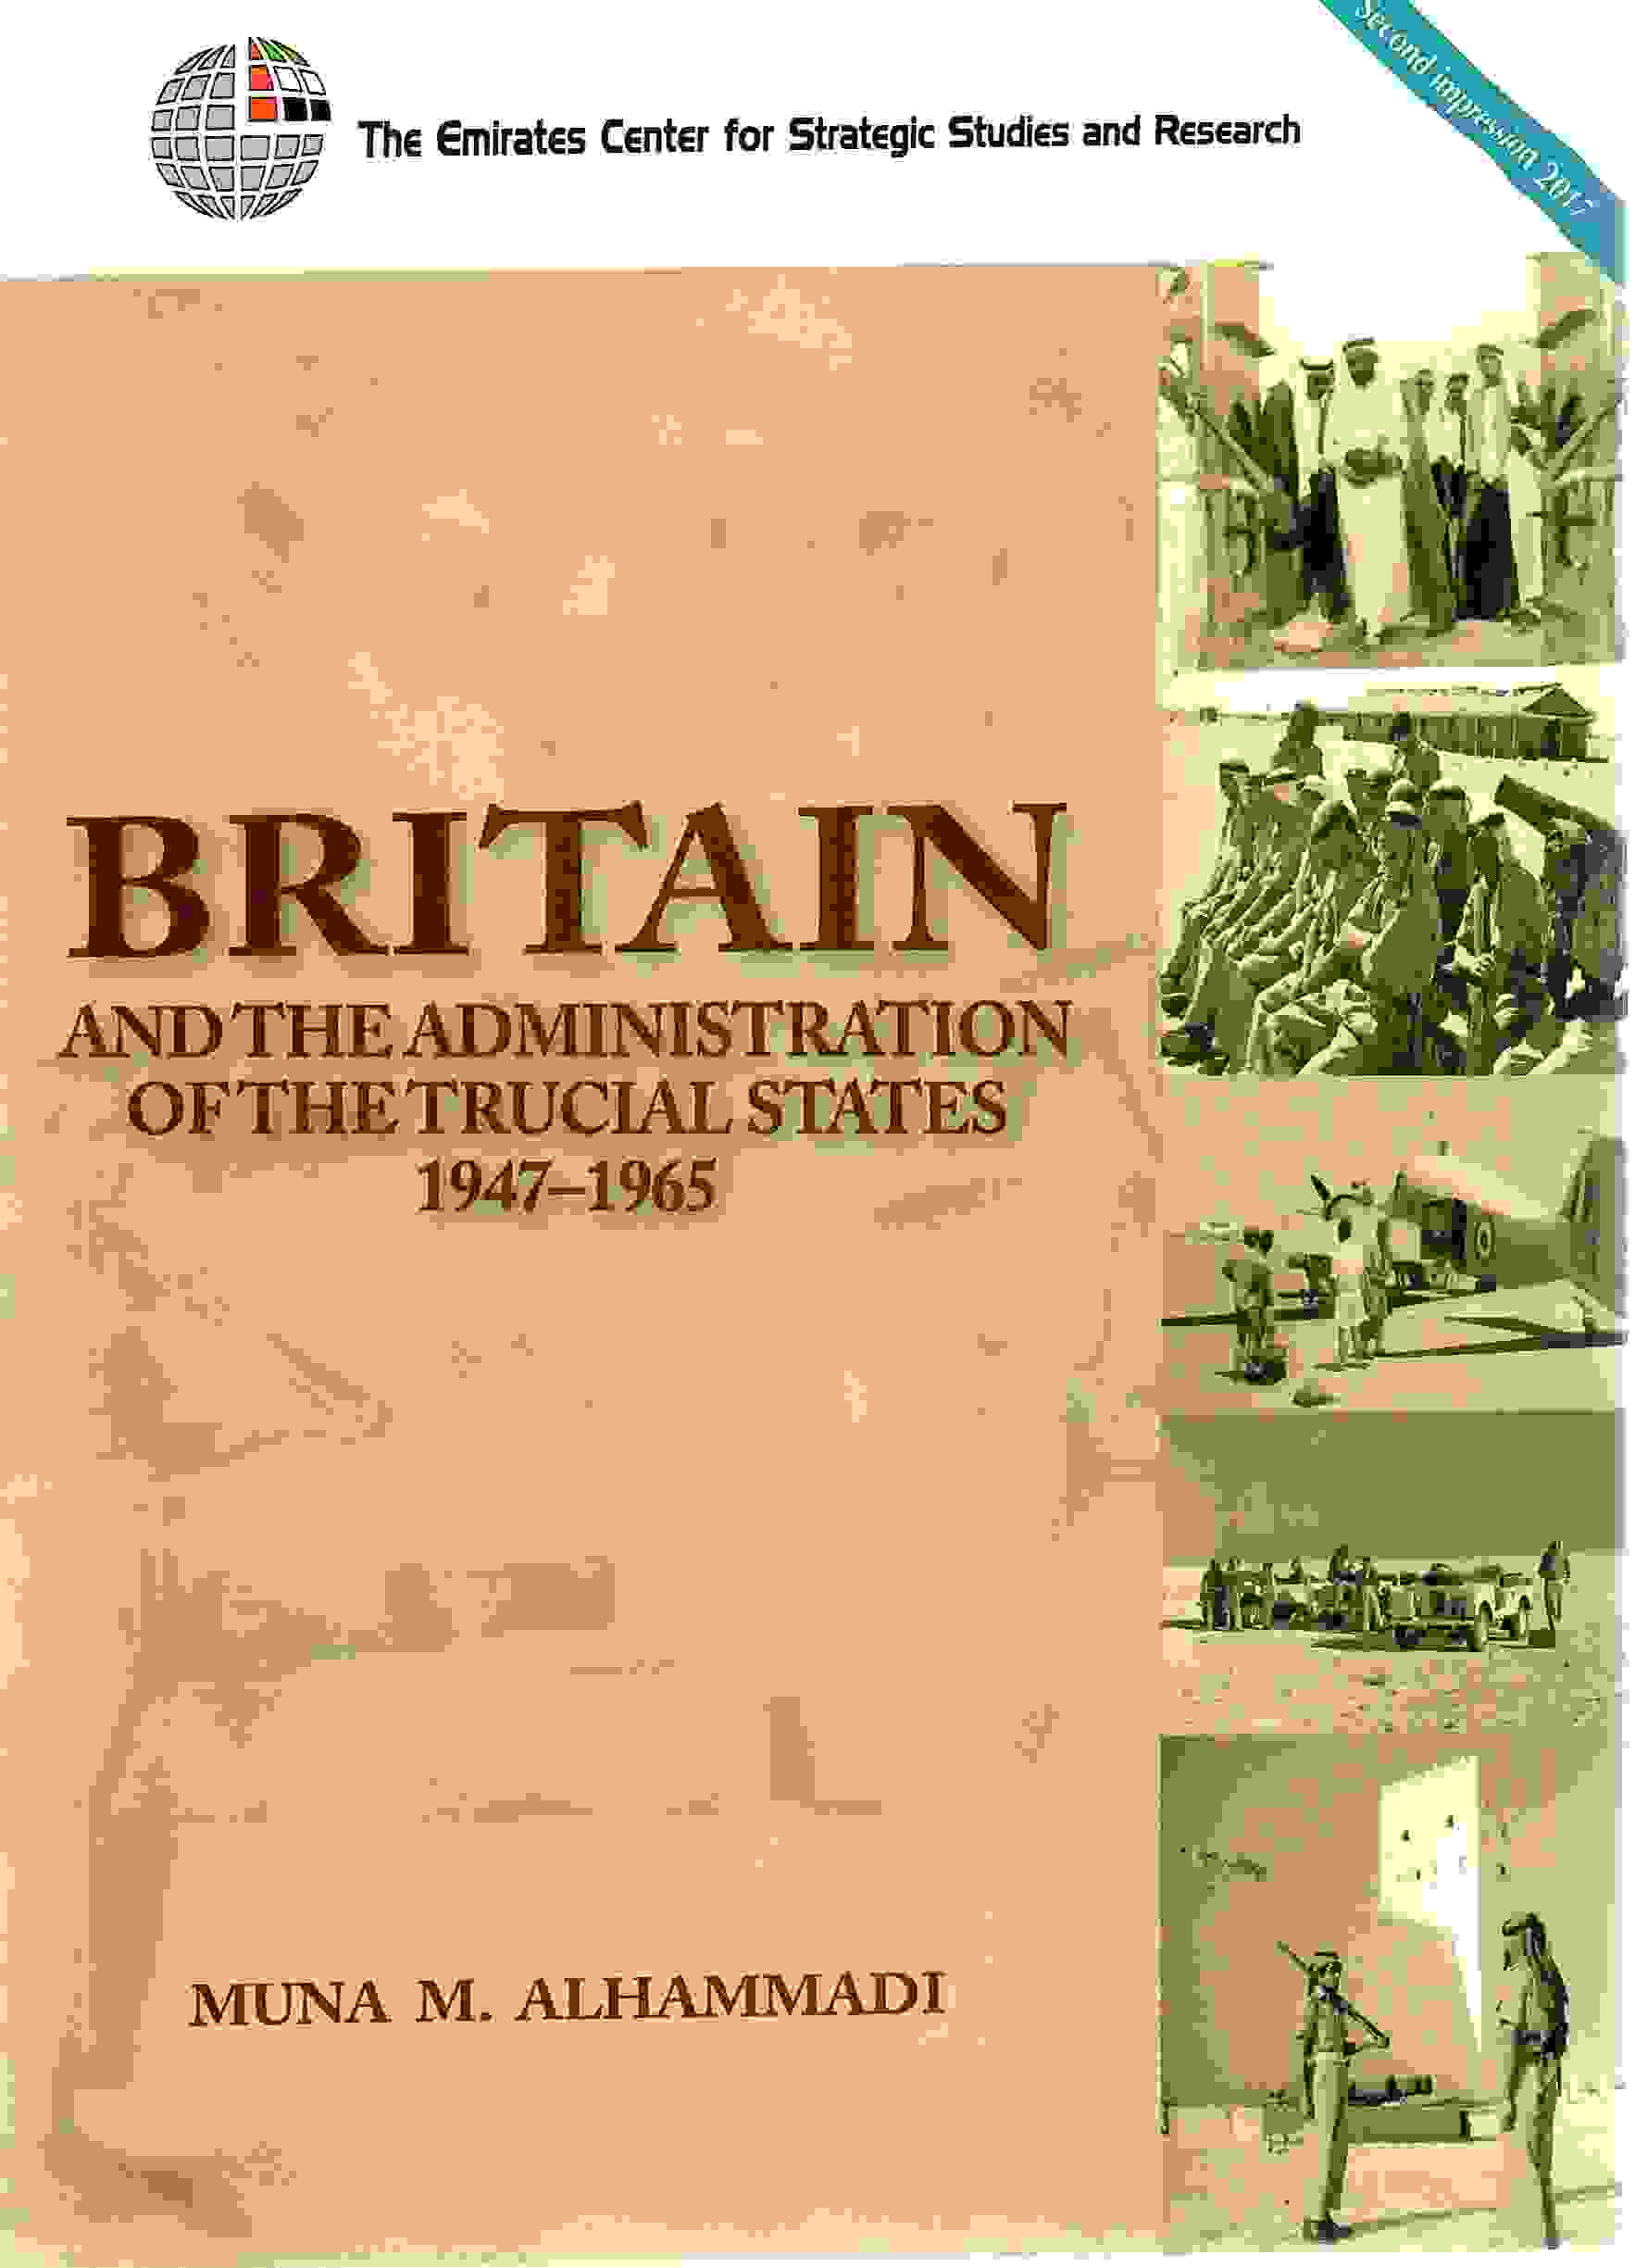 BRITAIN AND THE ADMINISTRATION OF THE TRUCIAL STATES 1947-1965